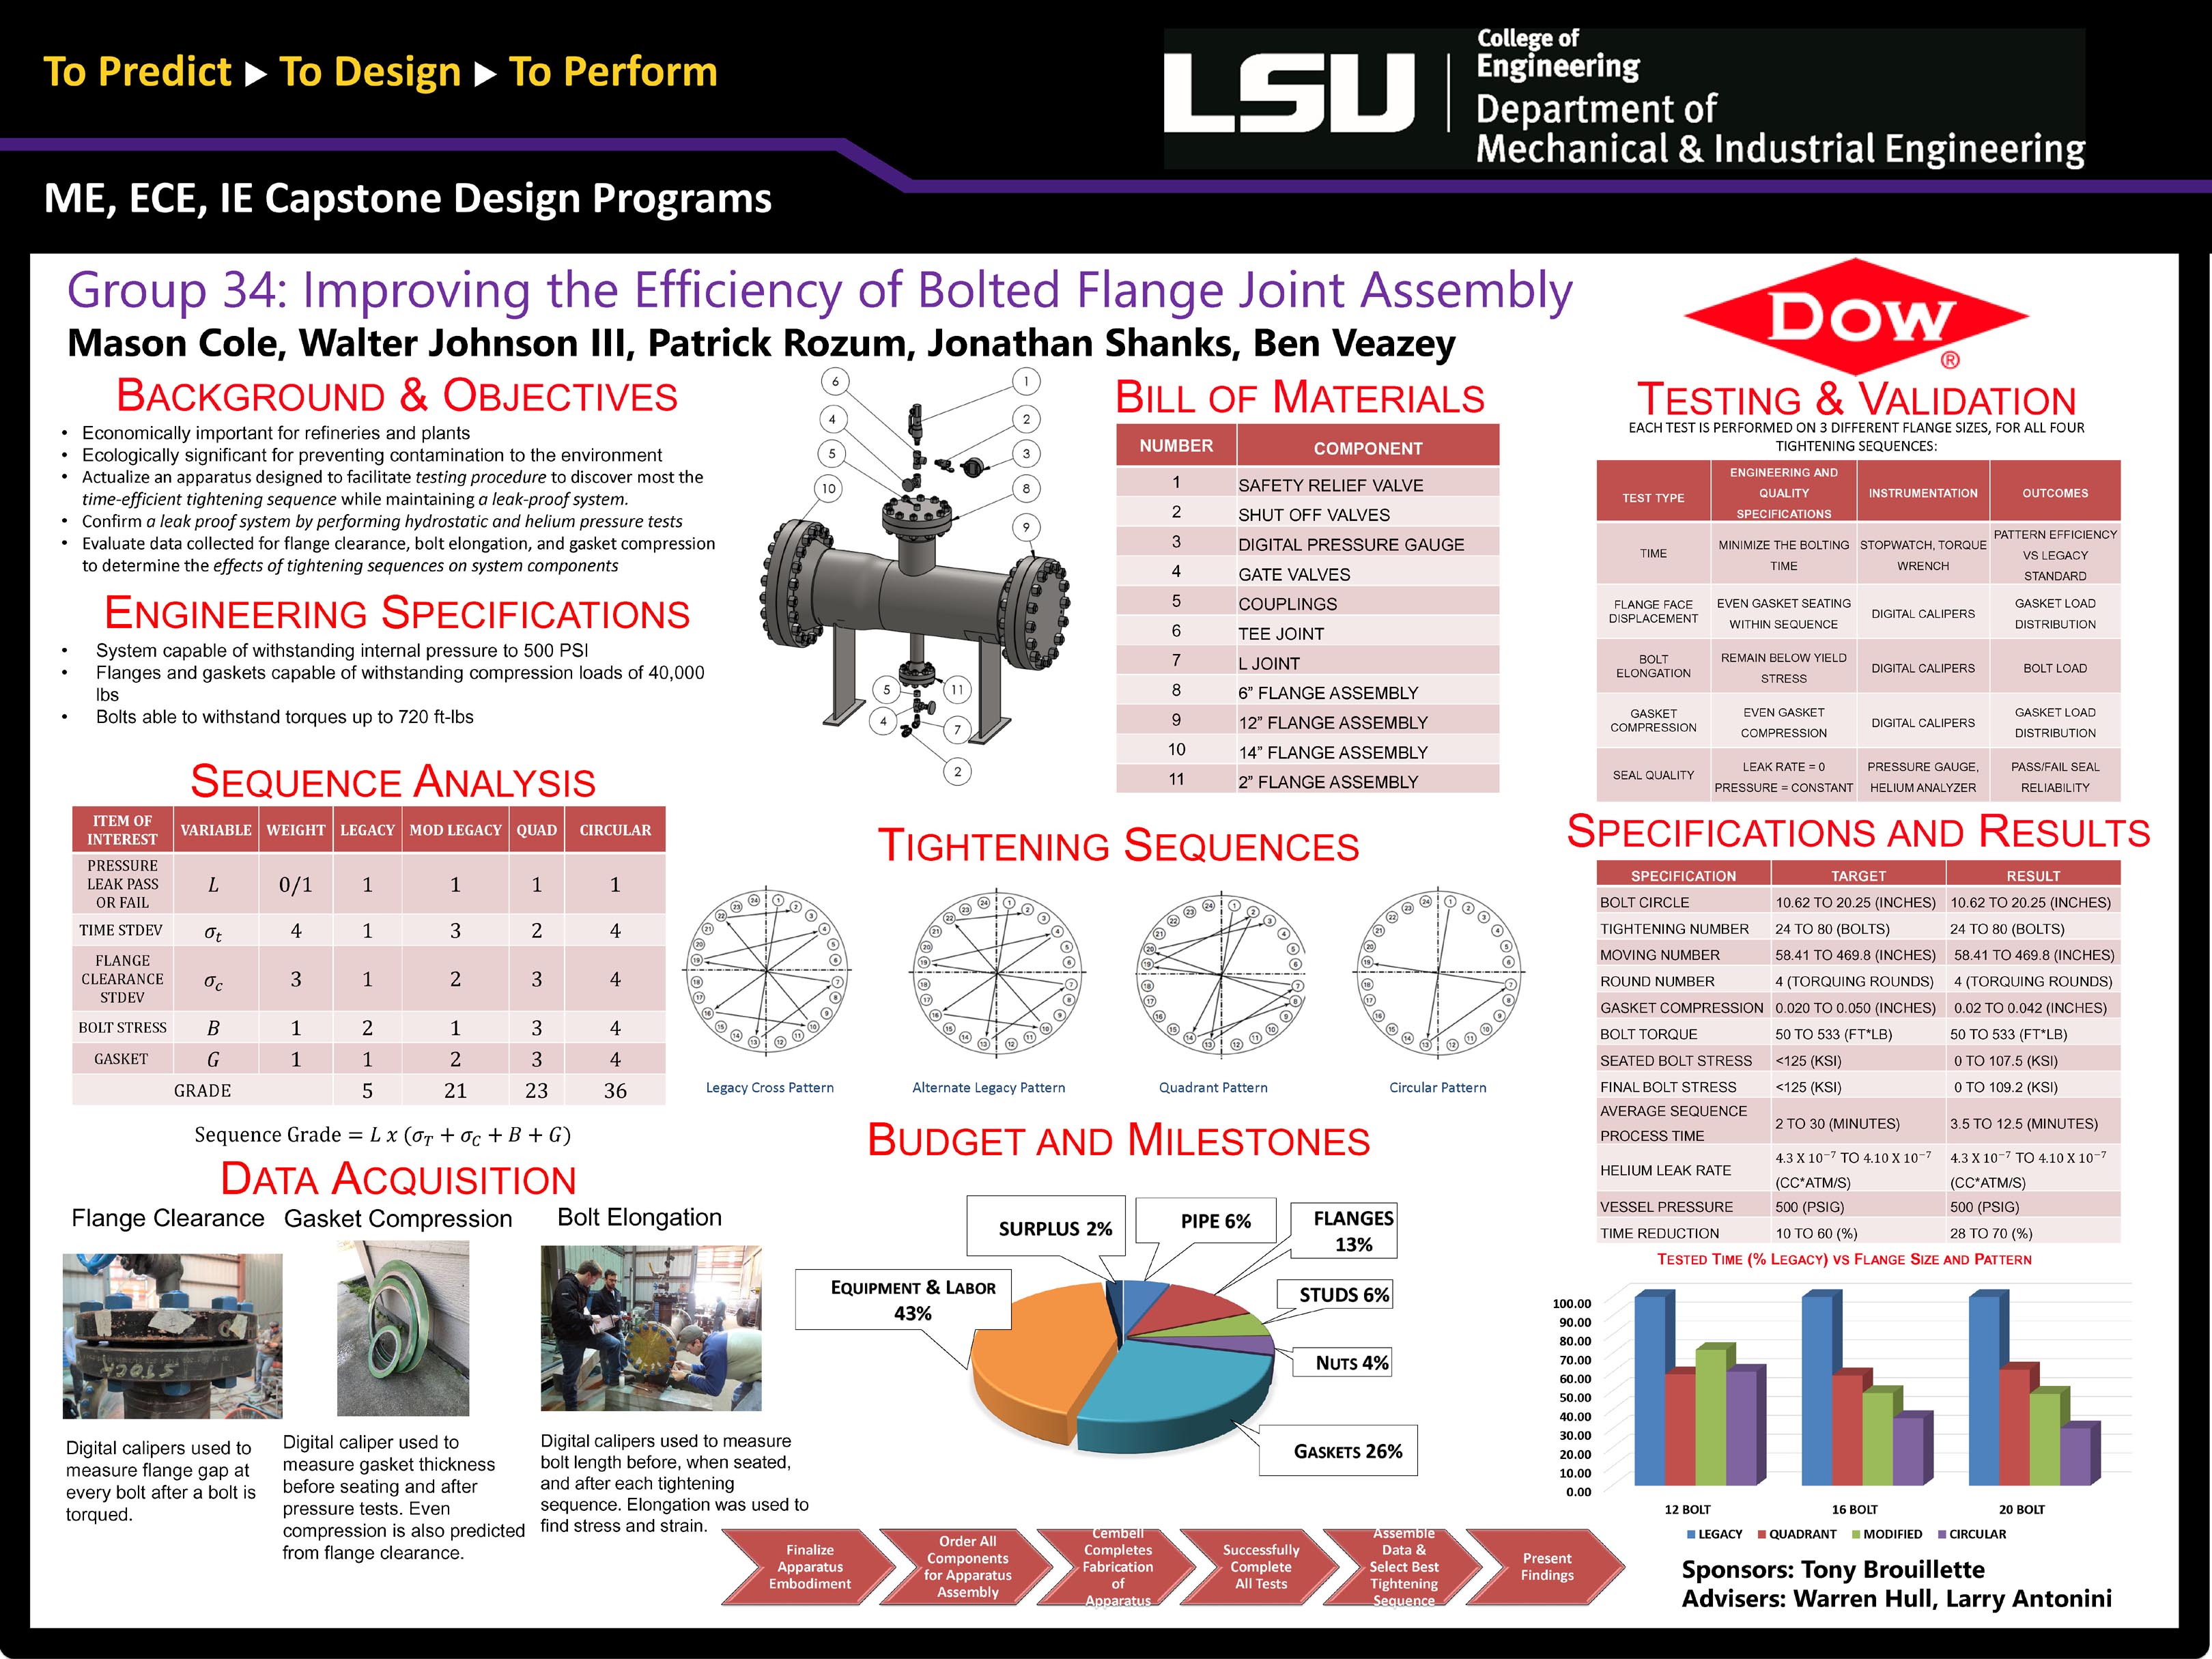 Project 34: Reliability Productivity Improvements of Bolted Flange Joint Assembly Tightening Sequences